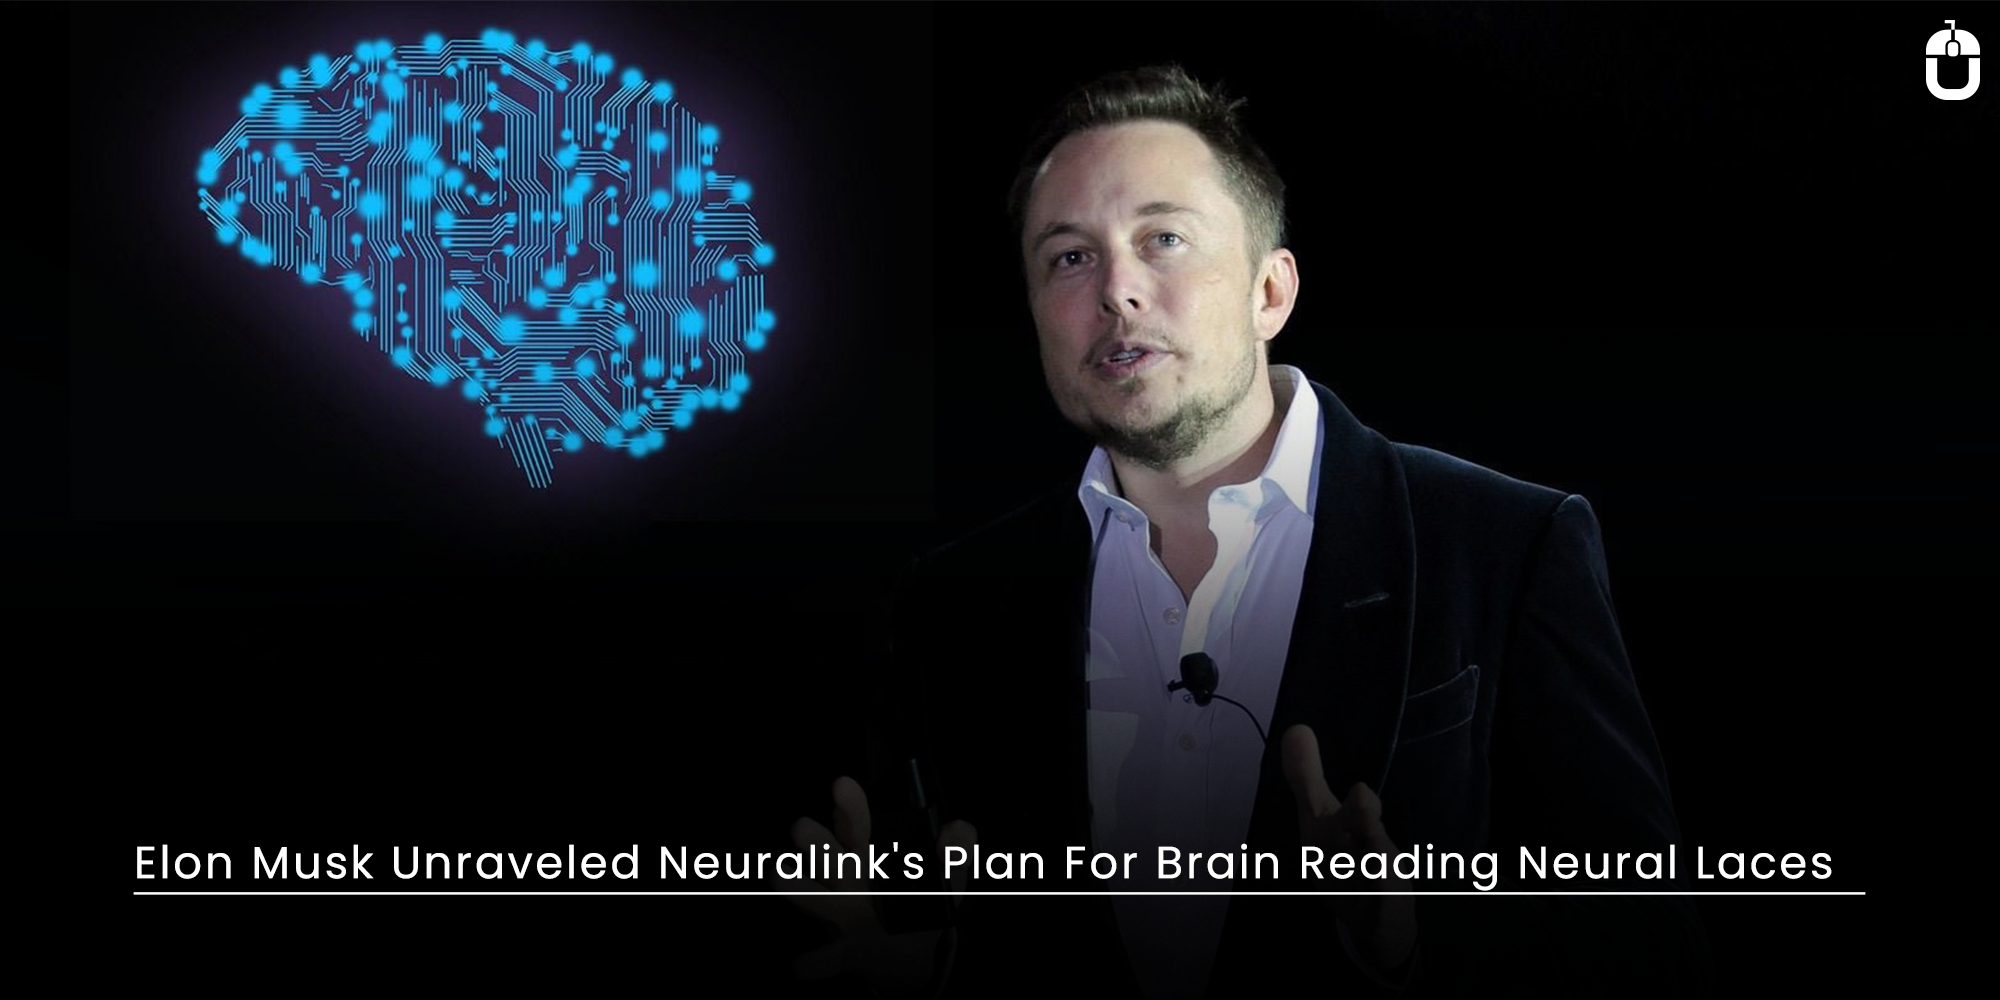 Elon Musk Unraveled Neuralink’s Plan For Brain Reading Neural Laces